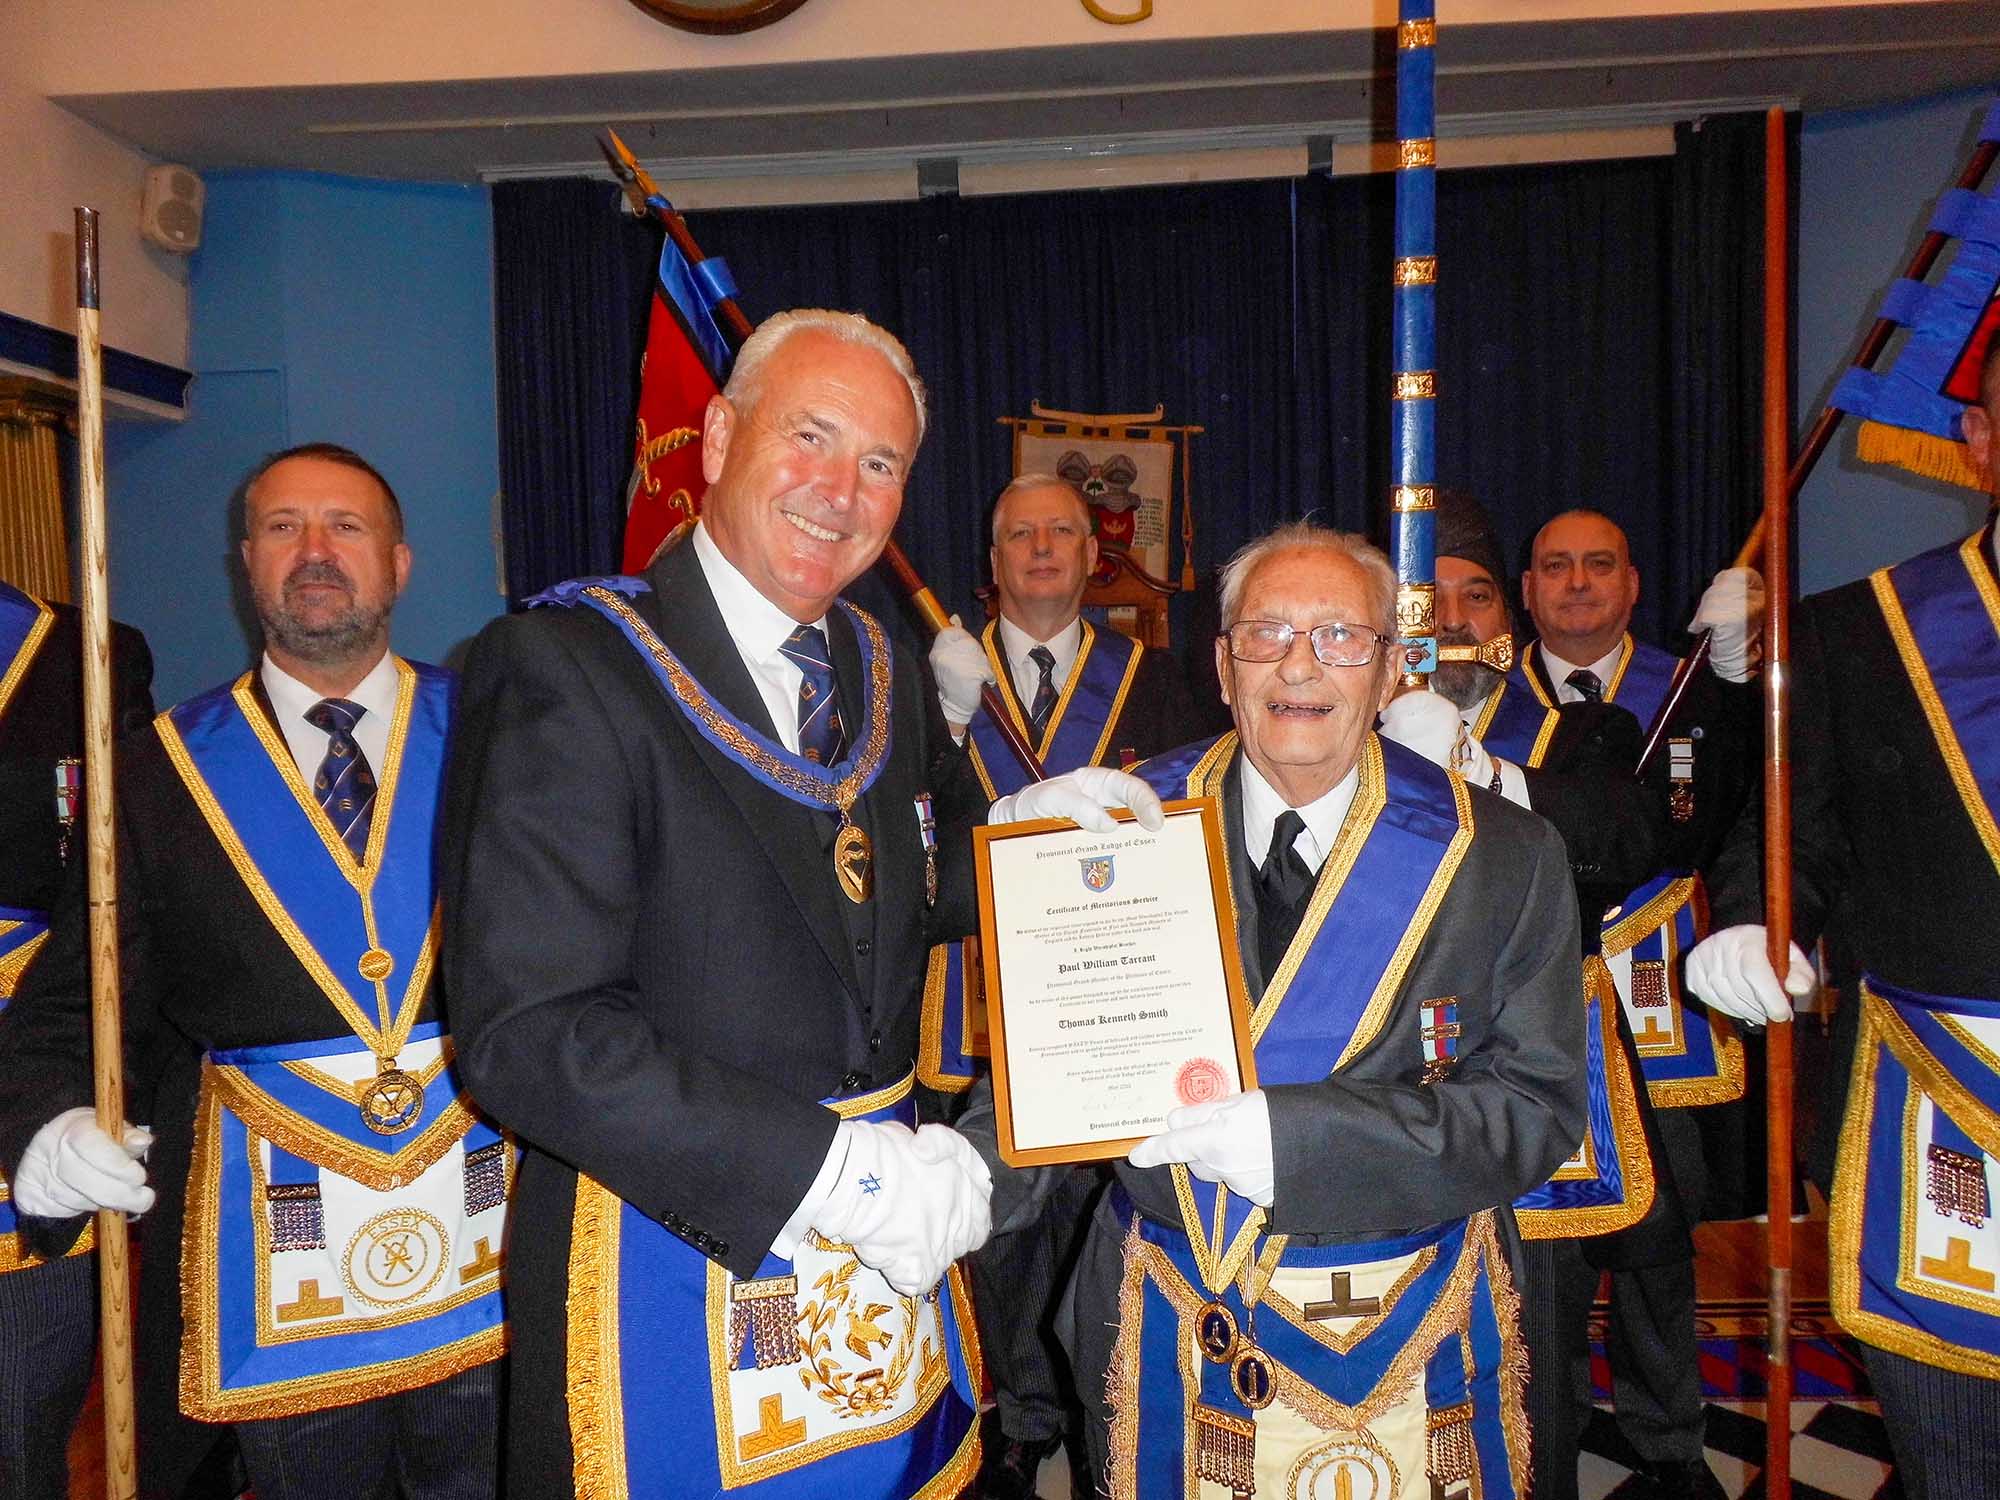 Assistant Provincial Grand Master, Graham Dickerson presenting a 60th Anniversary Certificate to Tommy Smith